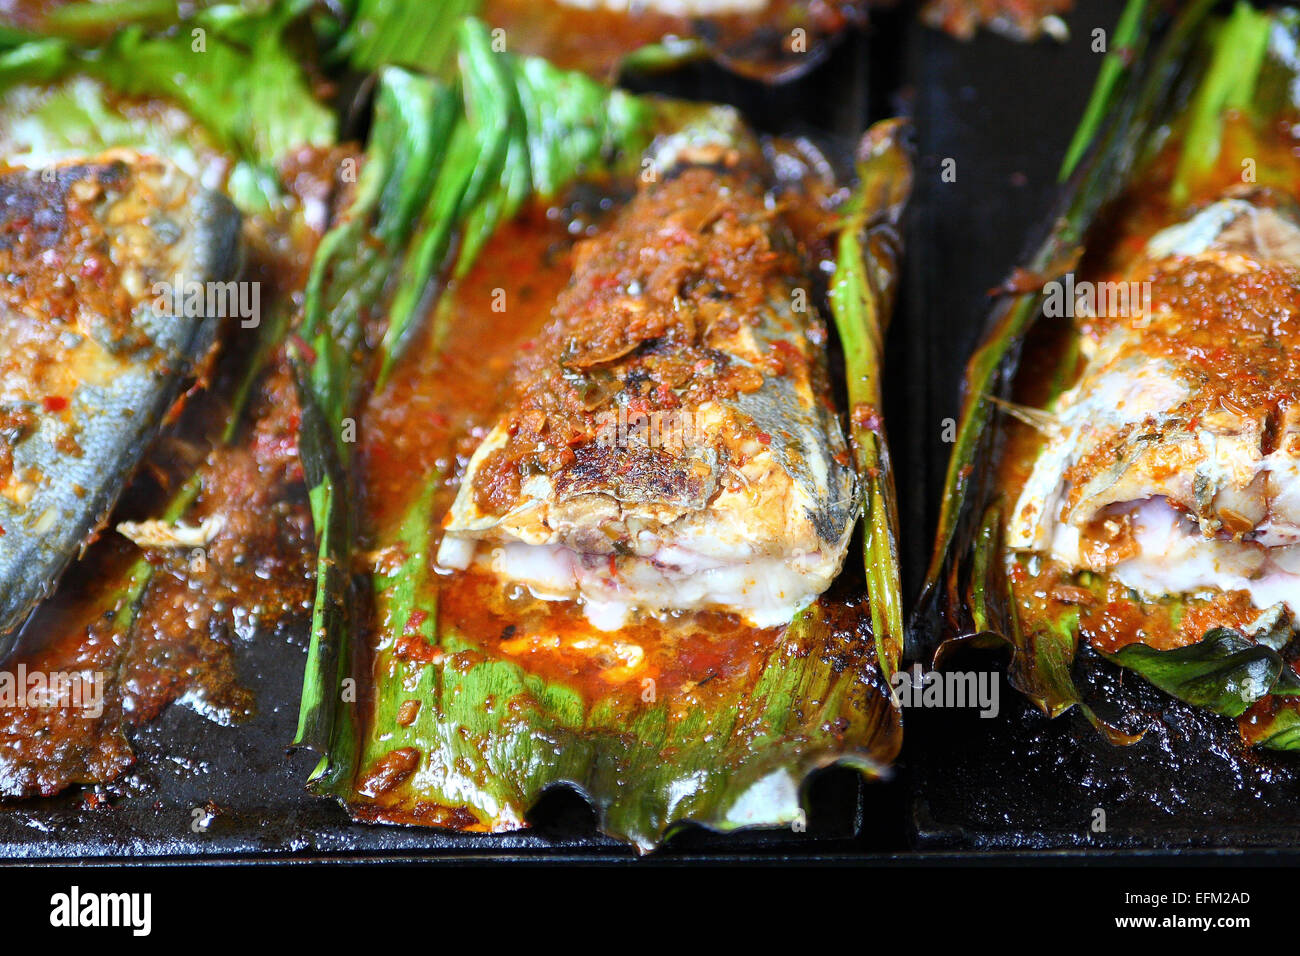 Grilled Fish Wrapped in Banana Leaf Stock Photo